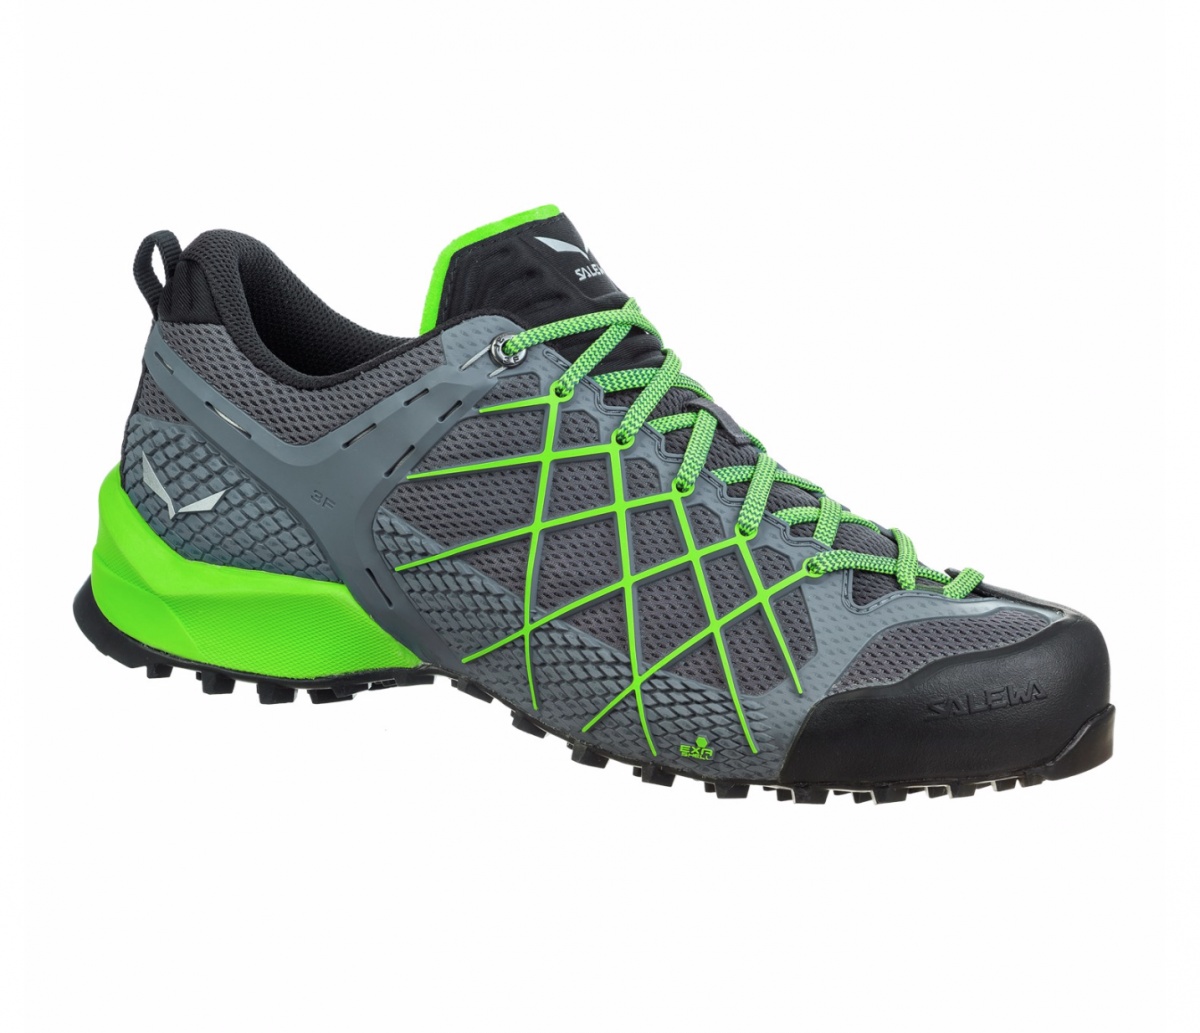 Salewa Wildfire Review | Tested by GearLab